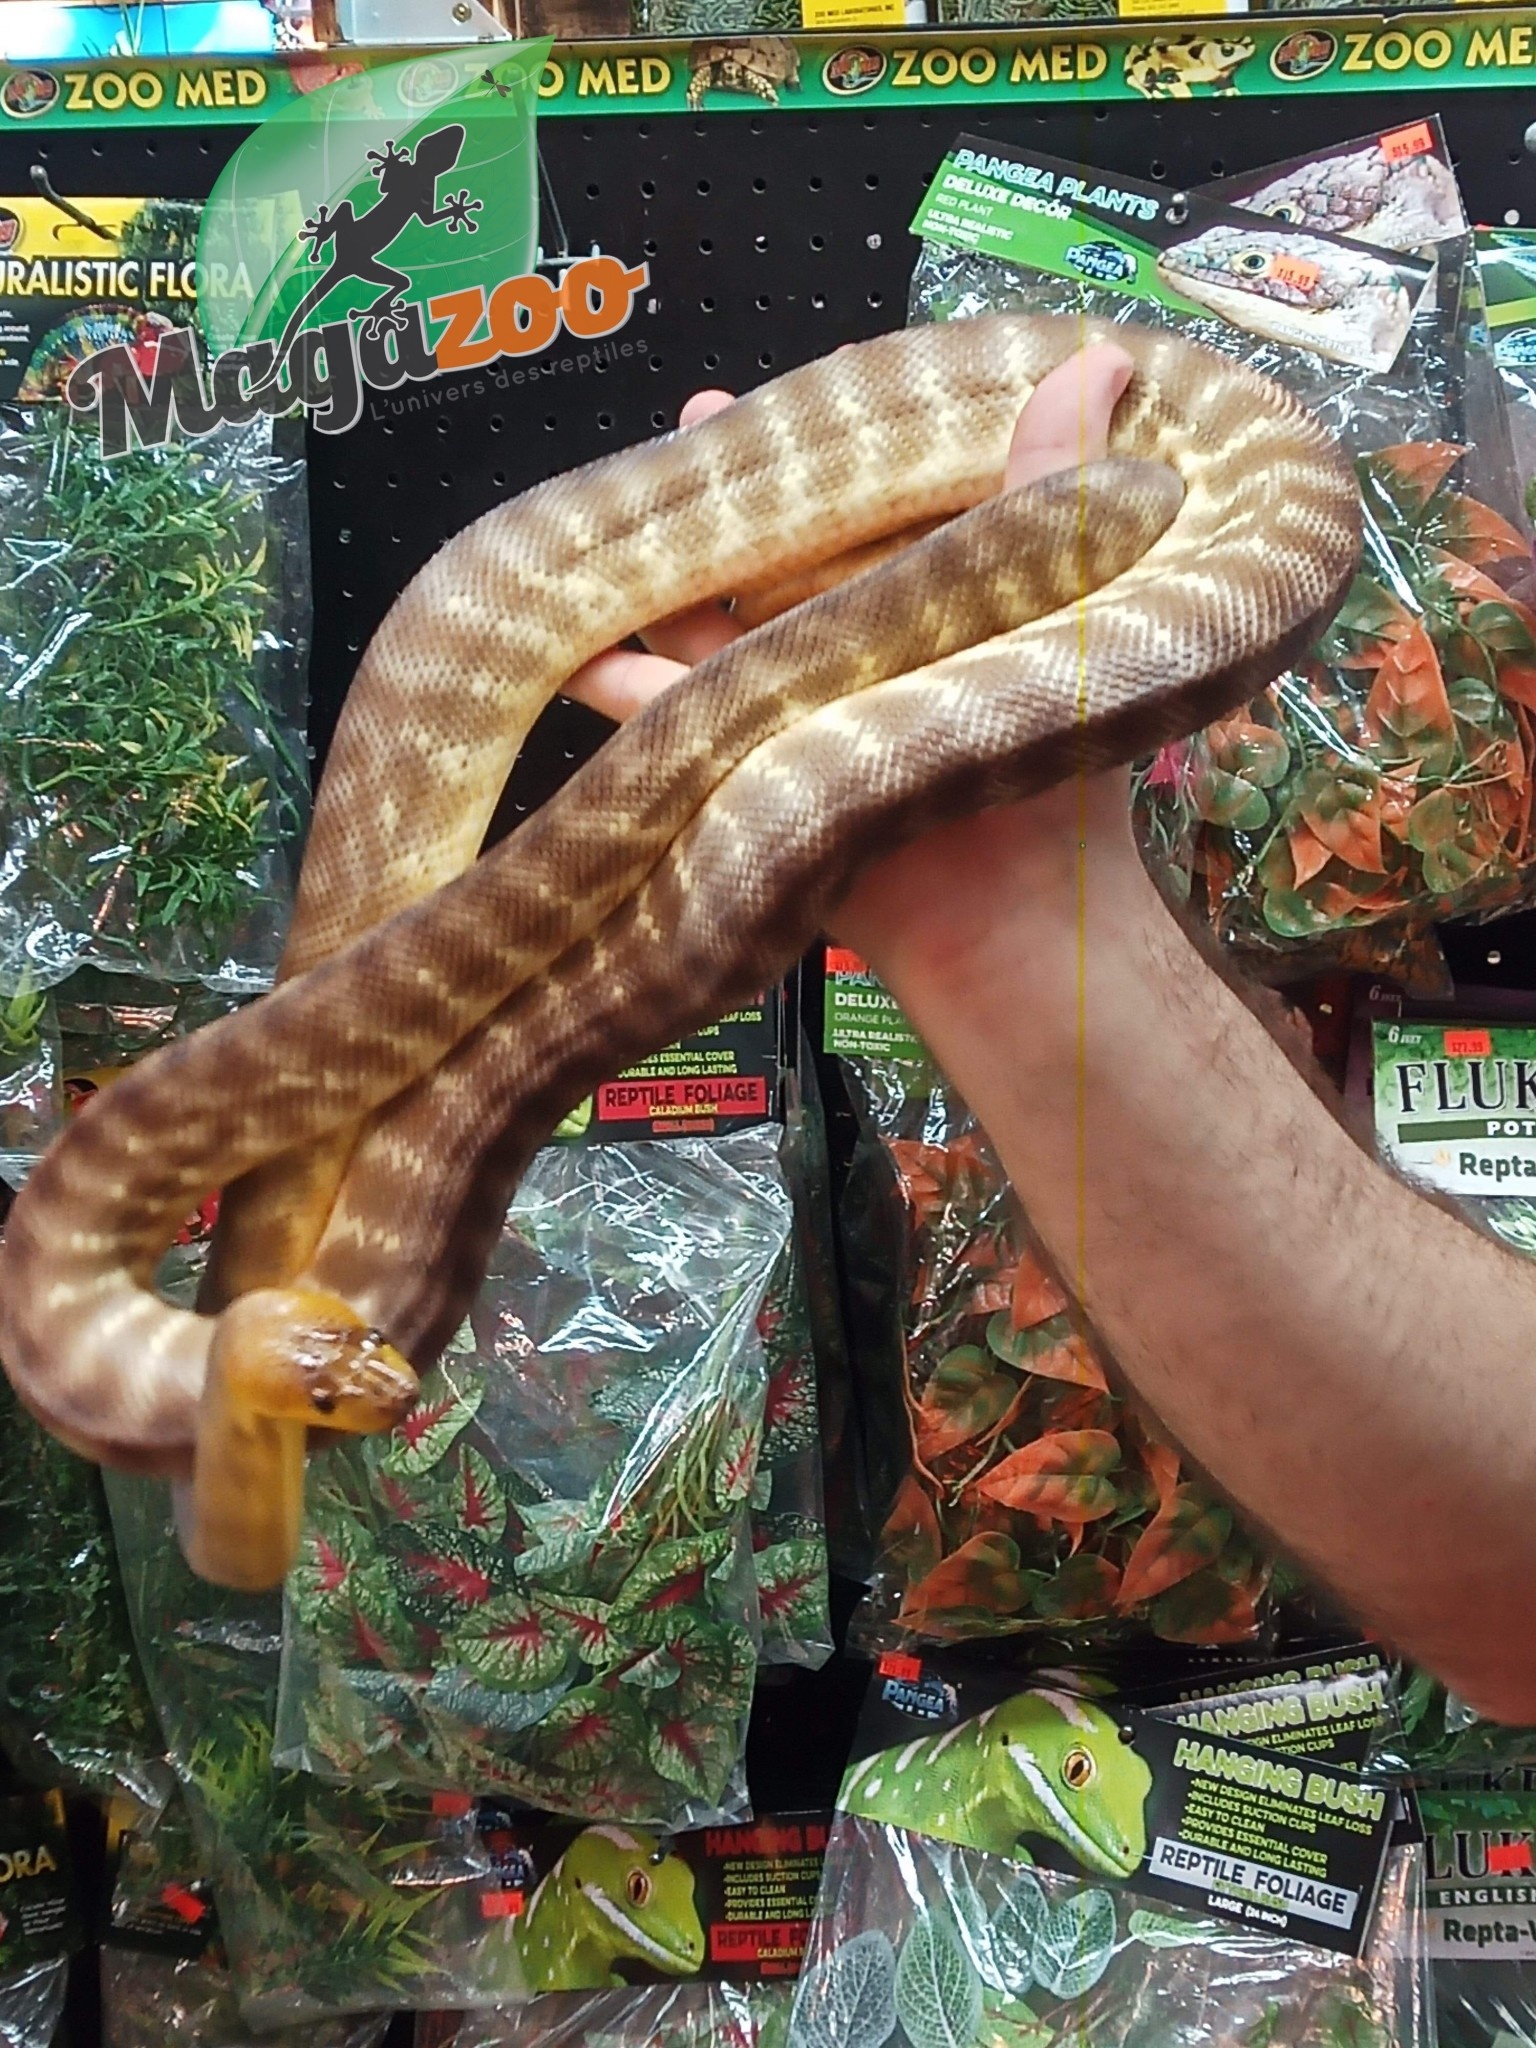 Magazoo Woma python  Male  3.5 years old